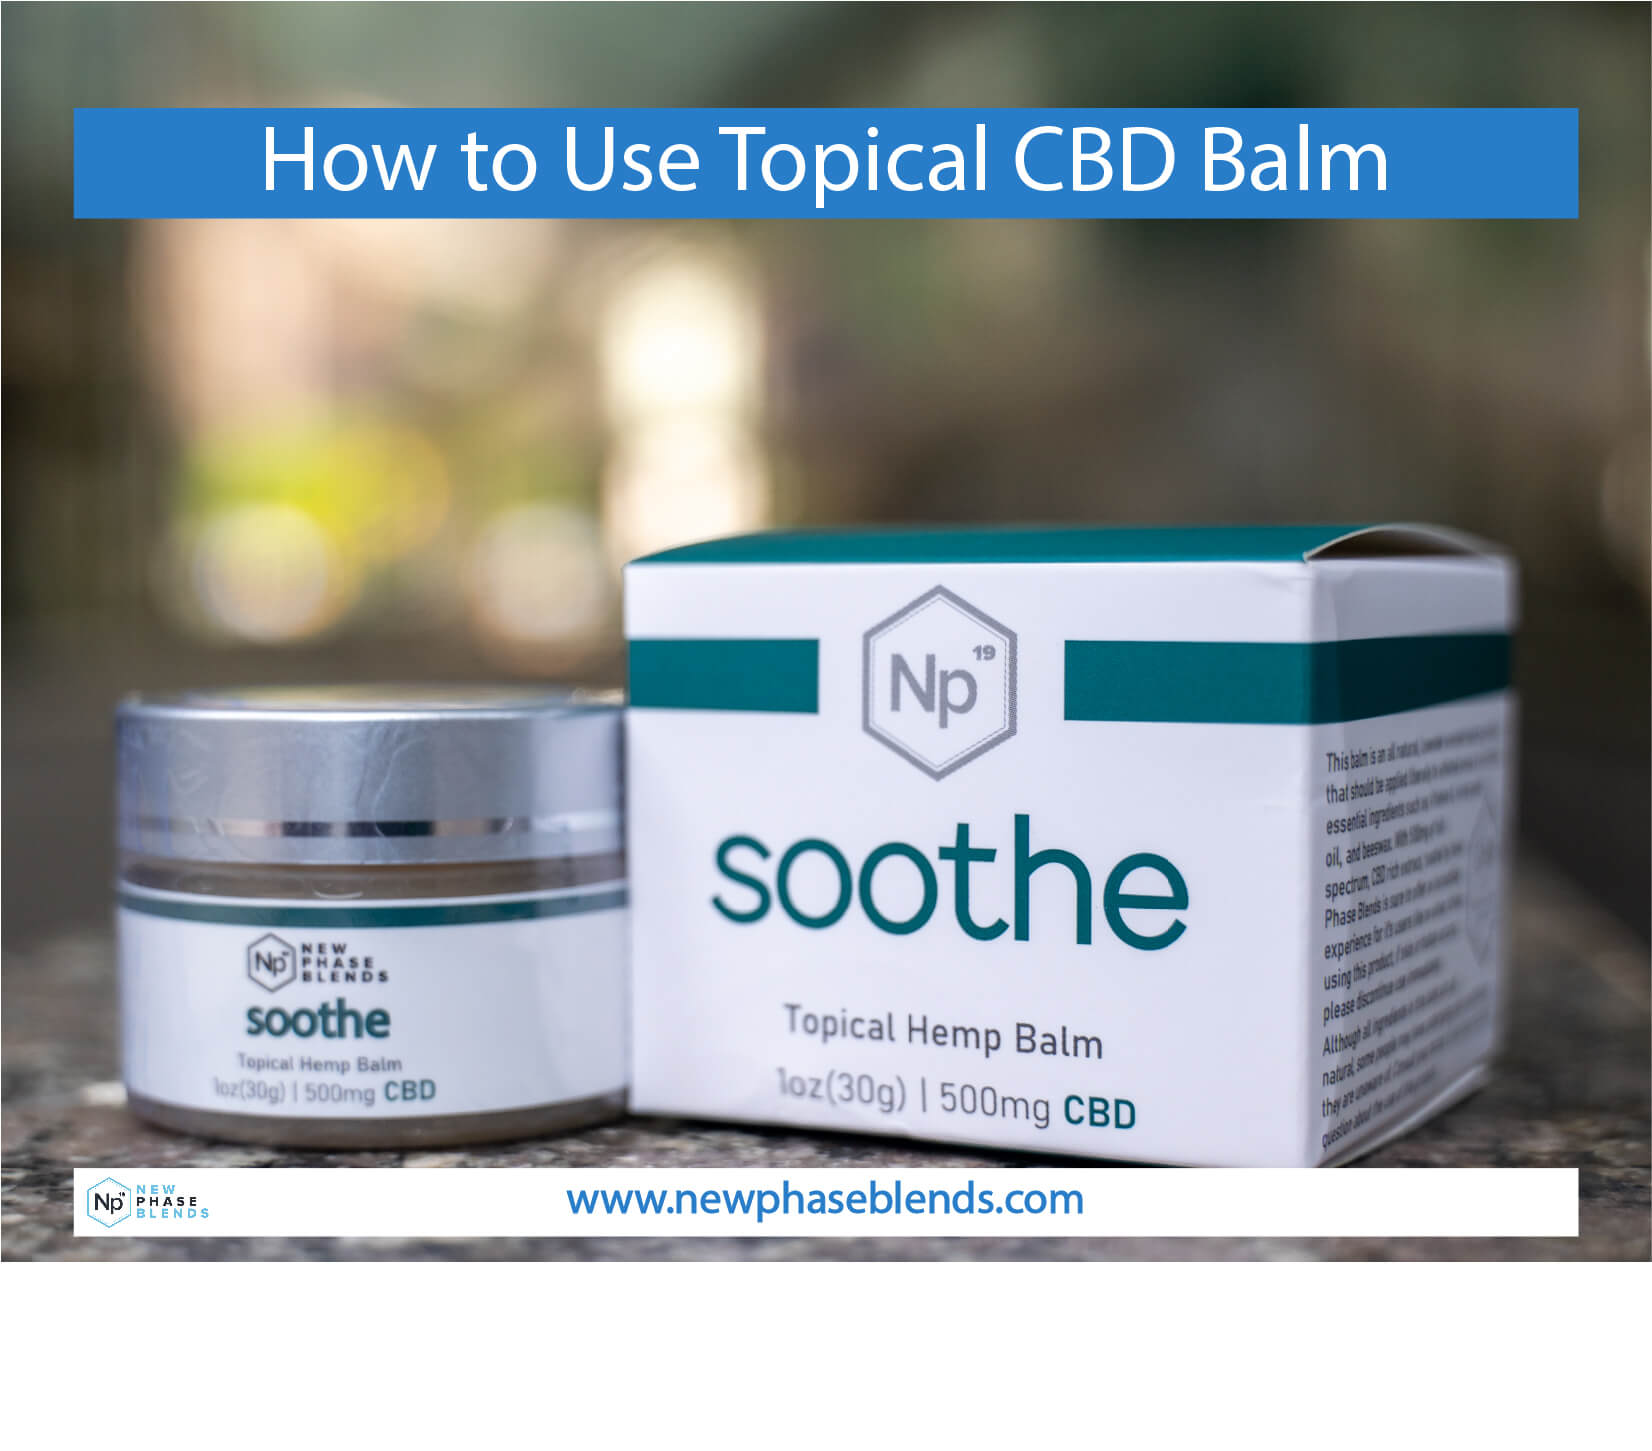 How to Use Topical CBD Balm